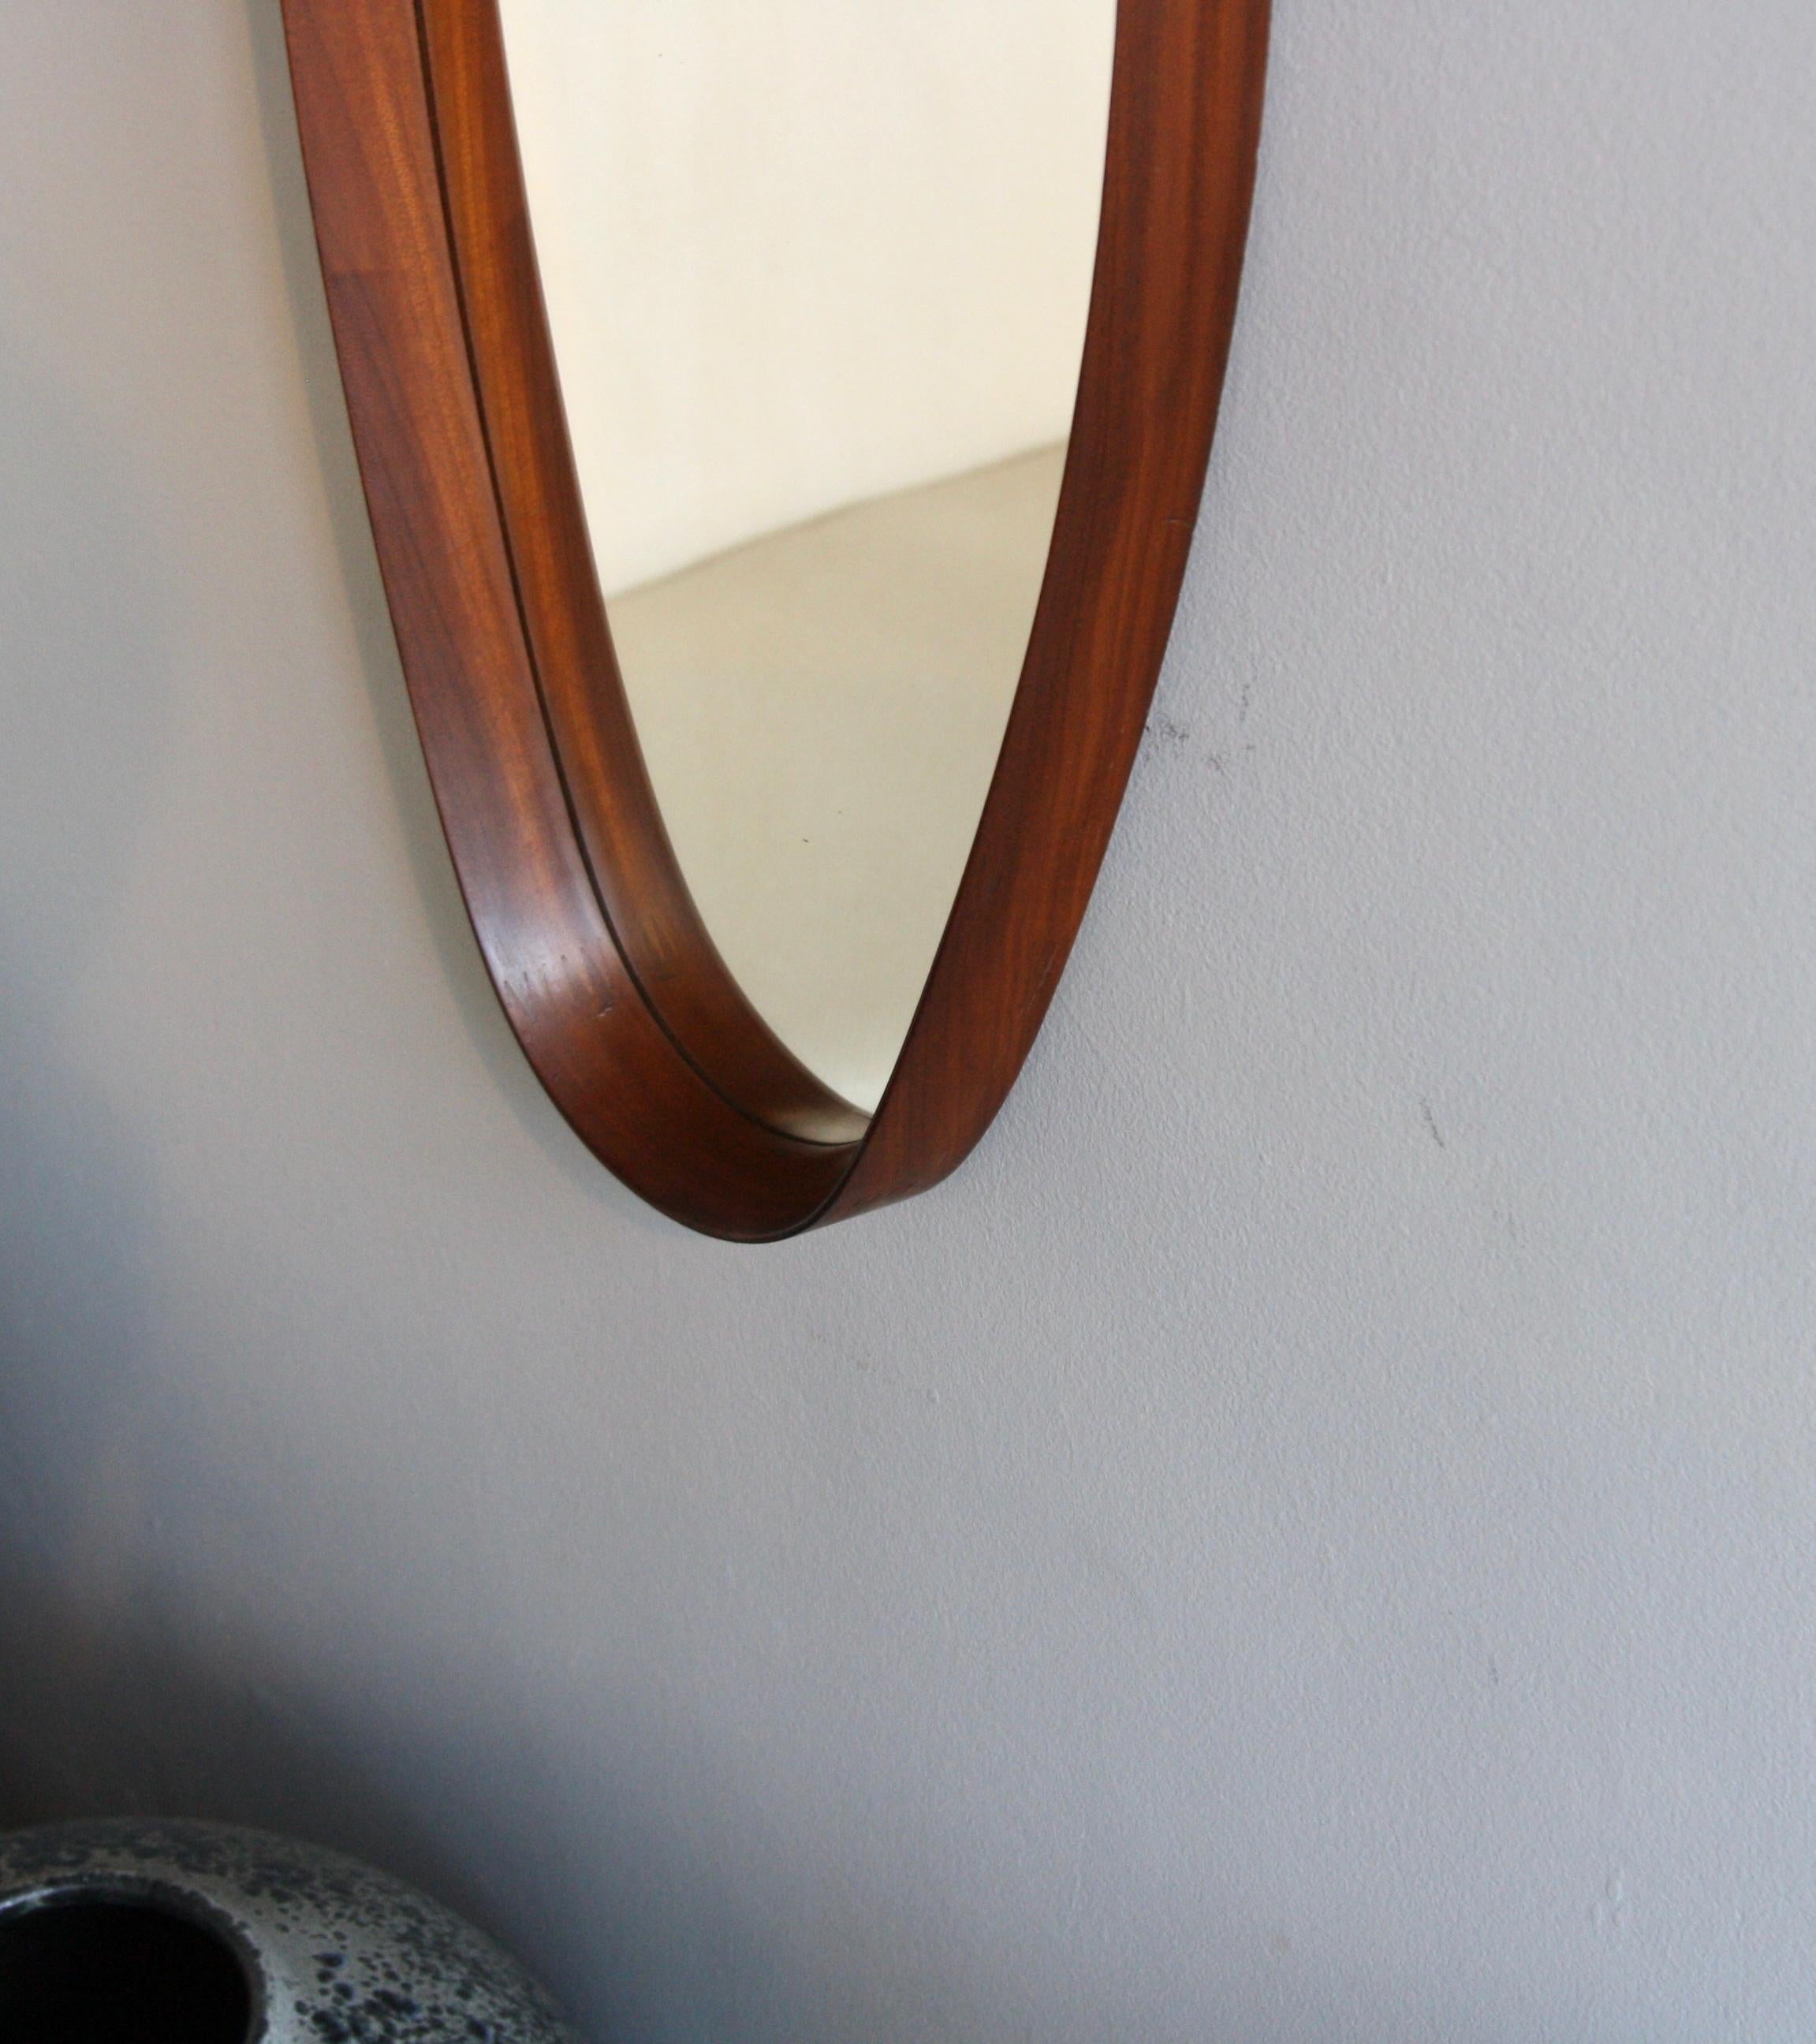 20th Century Danish Oval Shaped Vintage Wall Mirror with Leather Hanging Strap, circa 1950